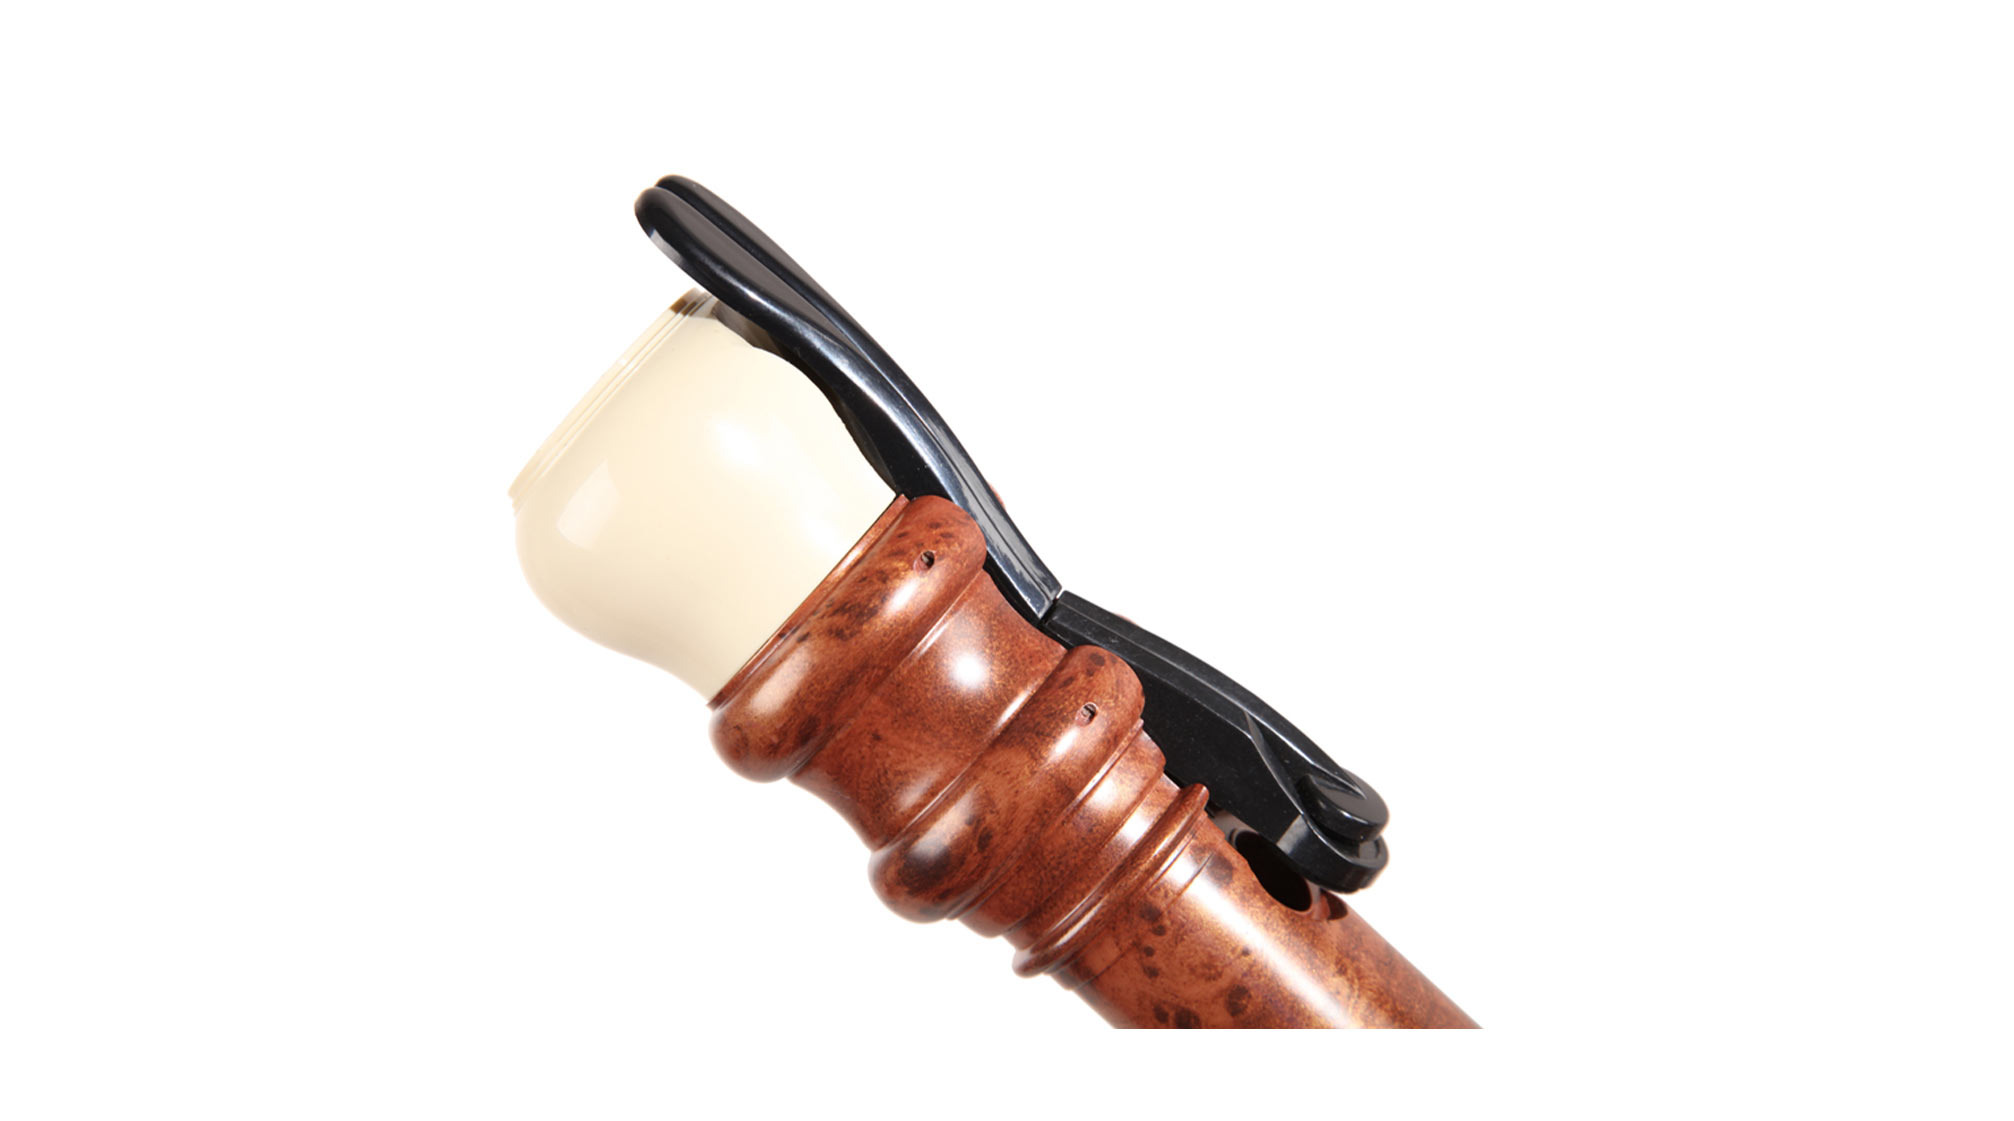 Woodnote, bass recorder in f, plastic, root wood imitation